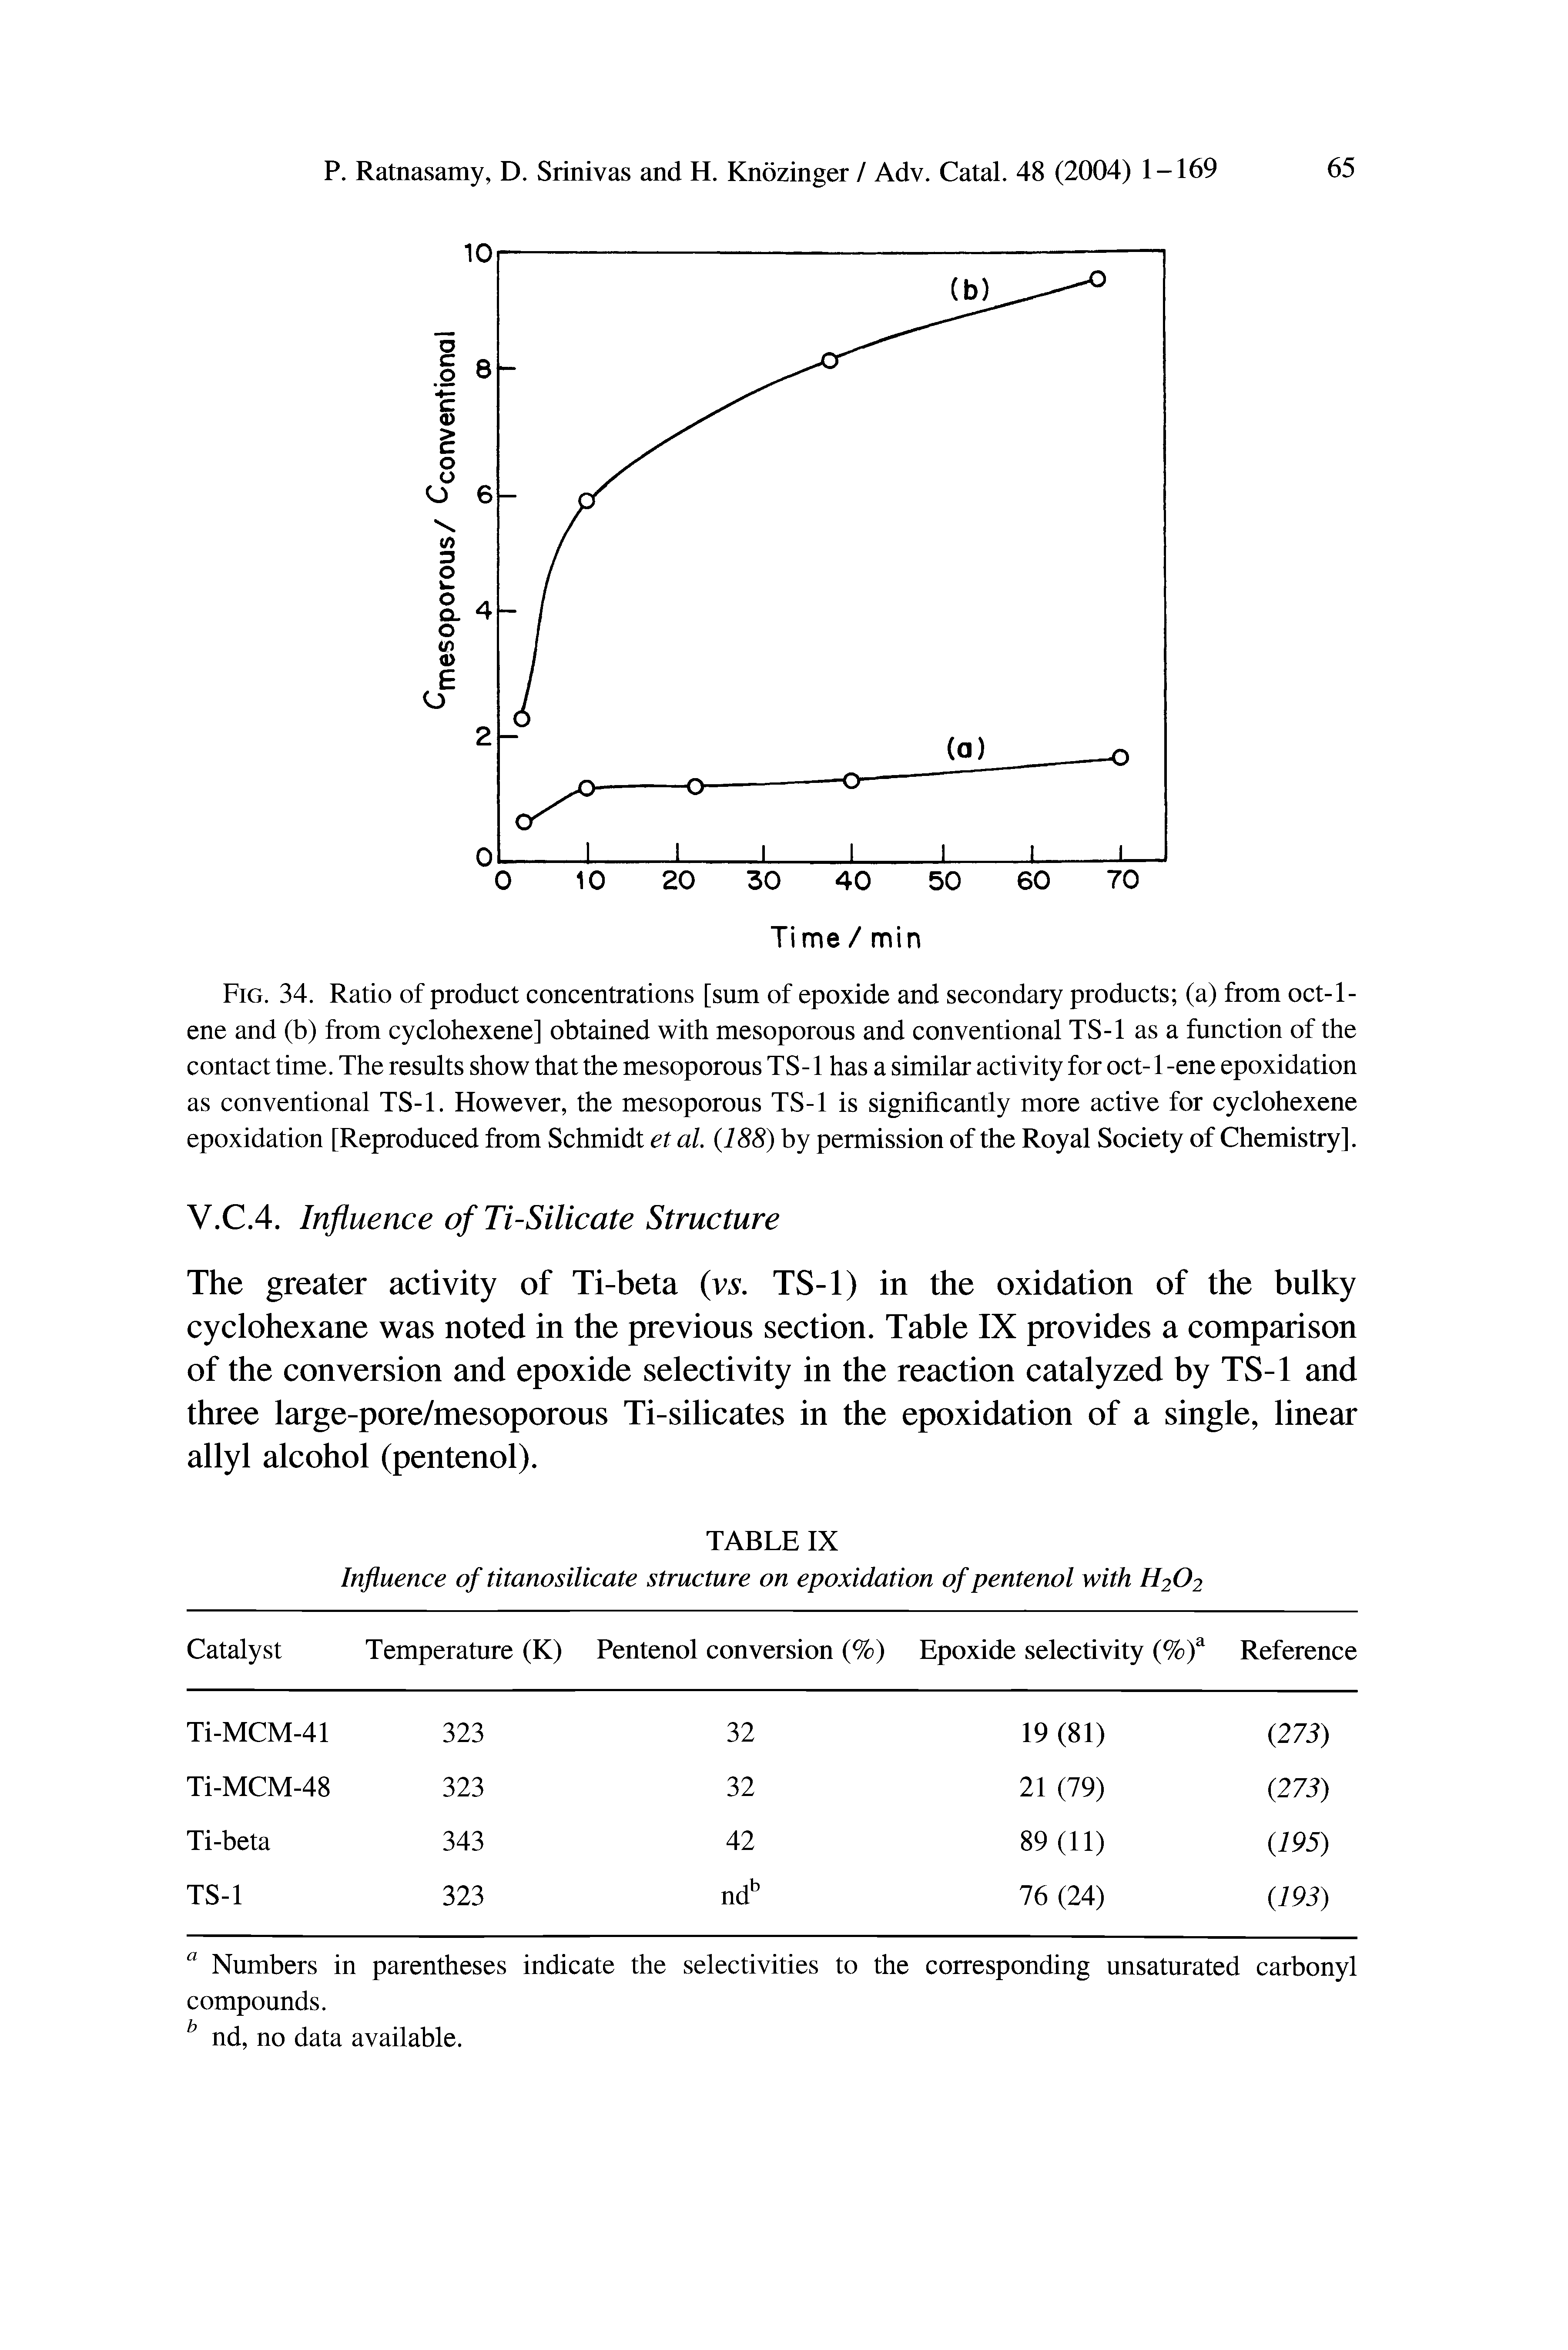 Fig. 34. Ratio of product concentrations [sum of epoxide and secondary products (a) from oct-1 -ene and (b) from cyclohexene] obtained with mesoporous and conventional TS-1 as a function of the contact time. The results show that the mesoporous TS-1 has a similar activity for oct-1 -ene epoxidation as conventional TS-1. However, the mesoporous TS-1 is significantly more active for cyclohexene epoxidation [Reproduced from Schmidt et al. (188) by permission of the Royal Society of Chemistry].